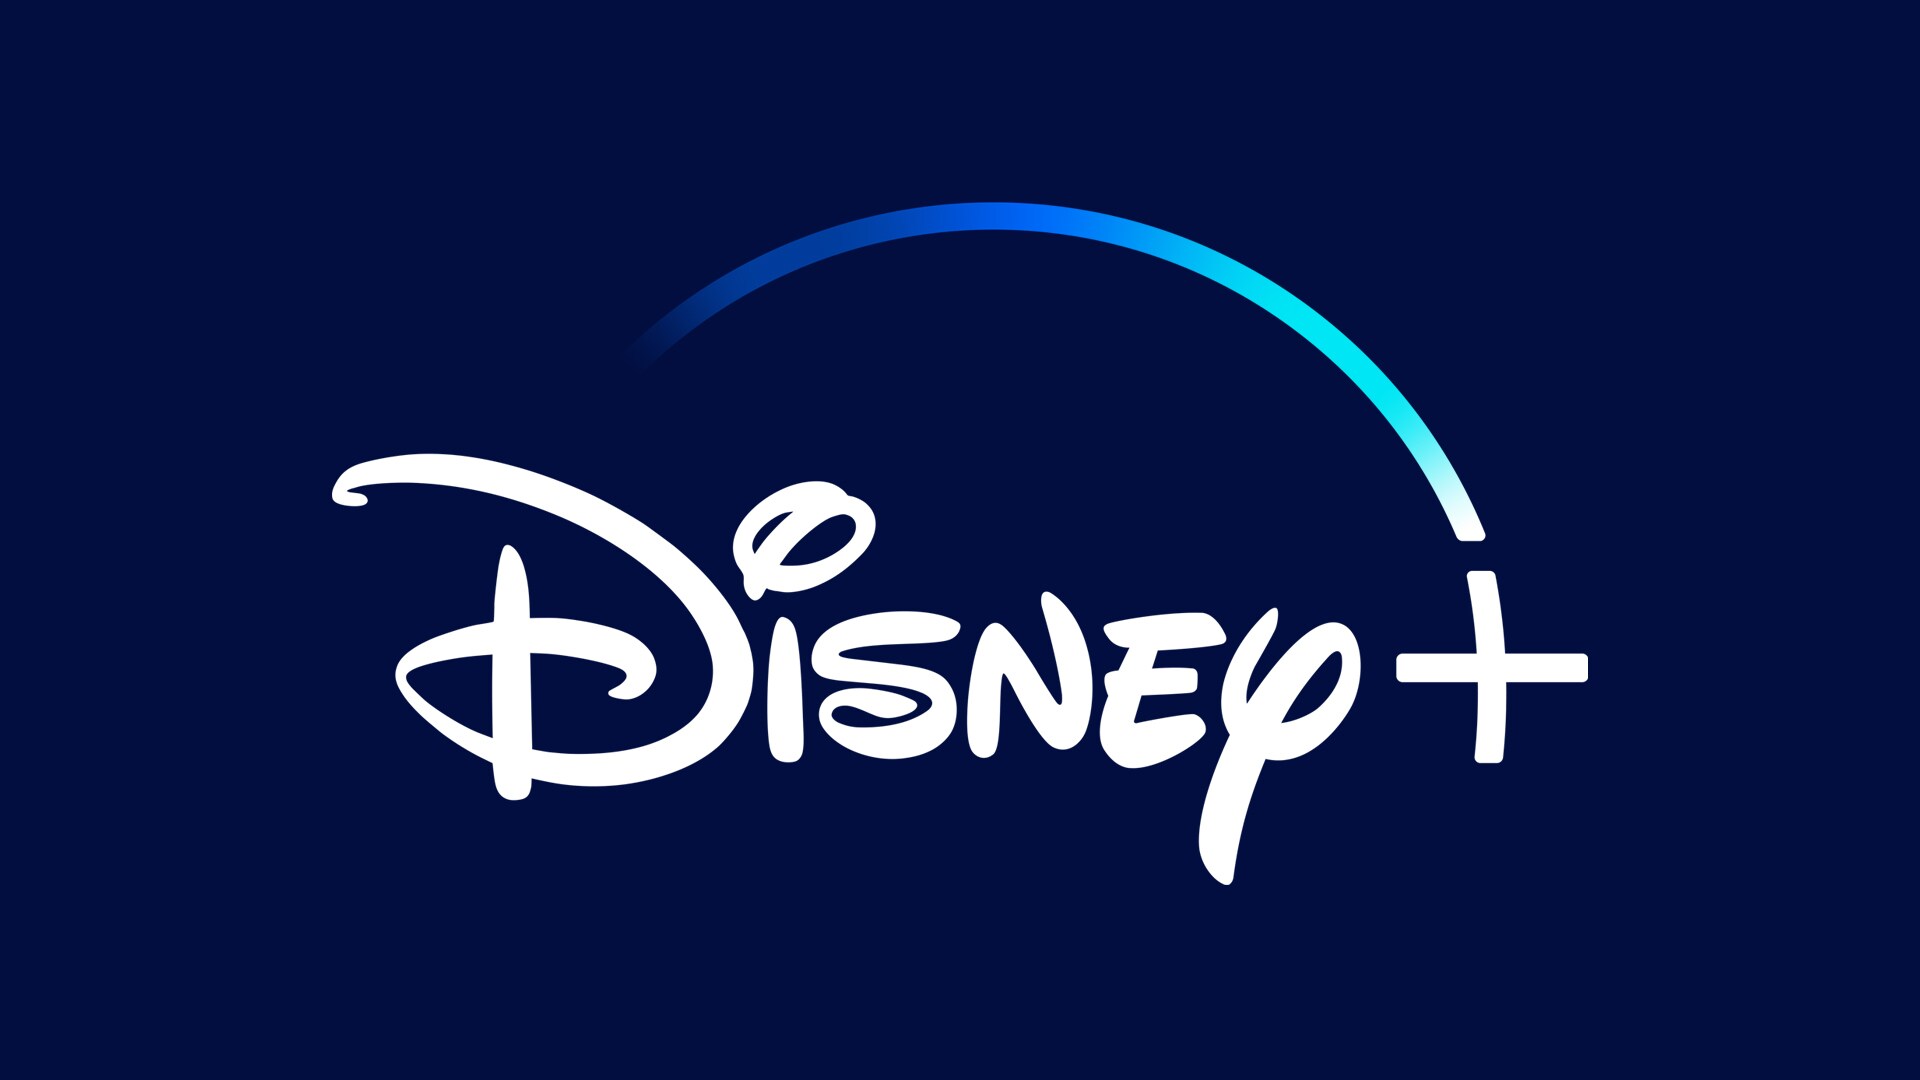 DISNEY+ ANNOUNCES SING-ALONG VERSIONS OF SEVEN DISNEY CLASSICS, INCLUDING MOANA AND THE LITTLE MERMAID LAUNCHING FRIDAY, 22 JULY 